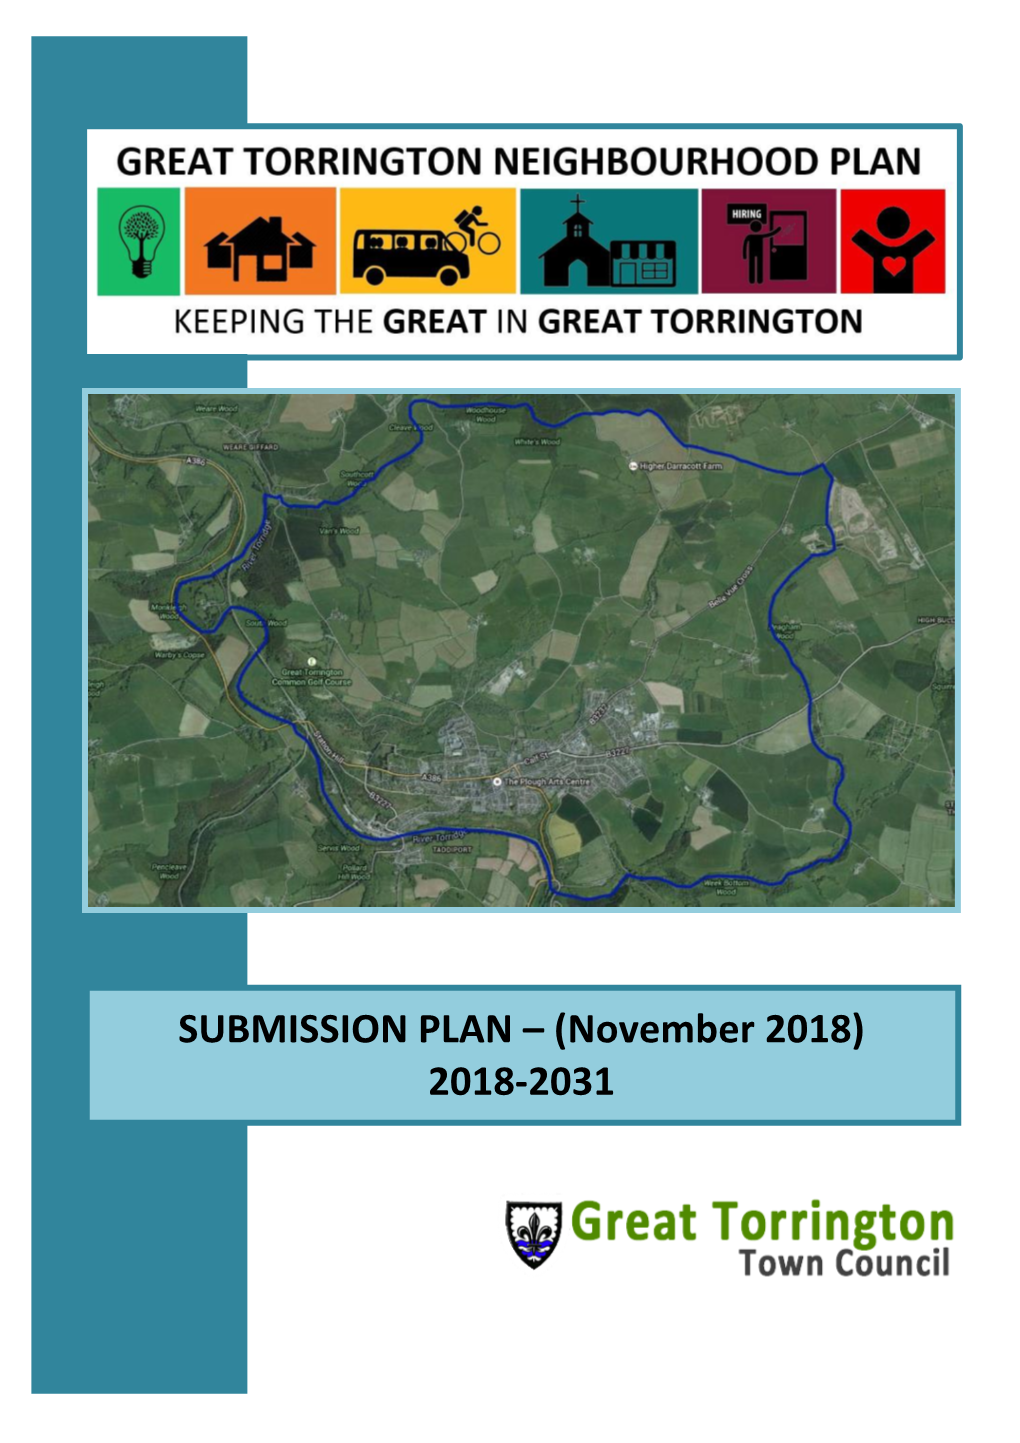 SUBMISSION PLAN – (November 2018)